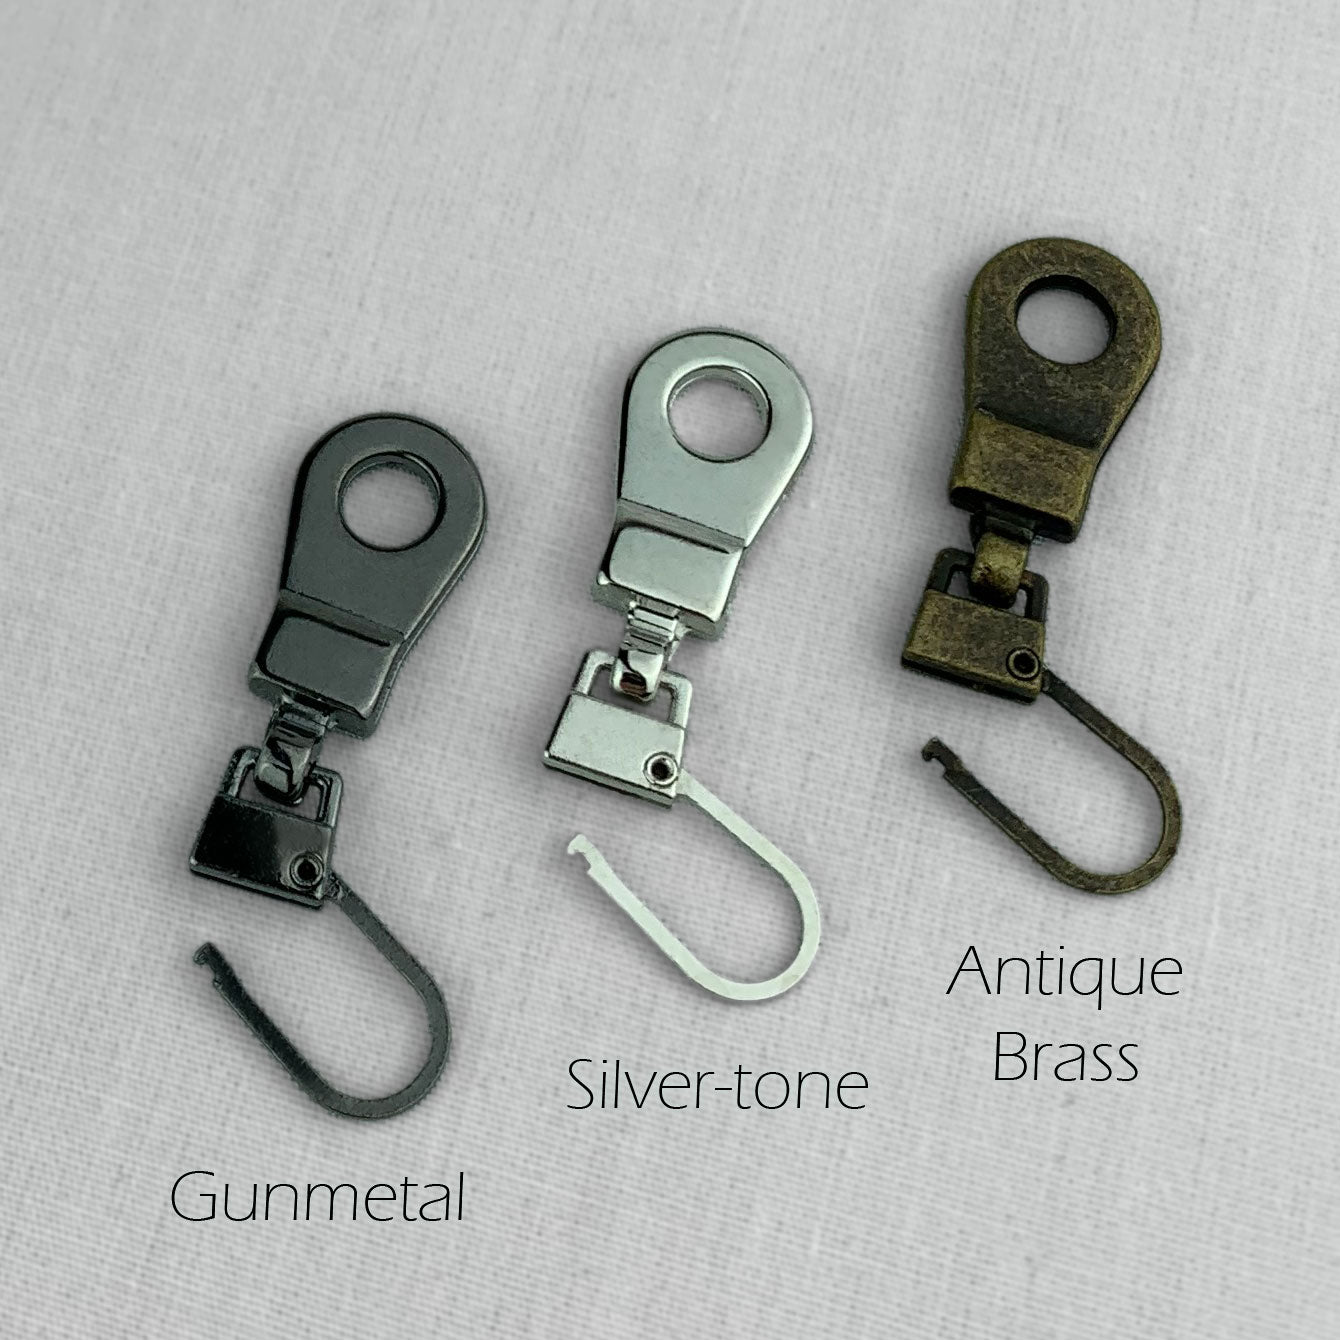 Zipper Pull (Pull-tab) Replacement - Silver-tone, Gunmetal or Antique Brass  - for Handbags, Backpacks, Purses, Apparel, Sleeping Bags & more